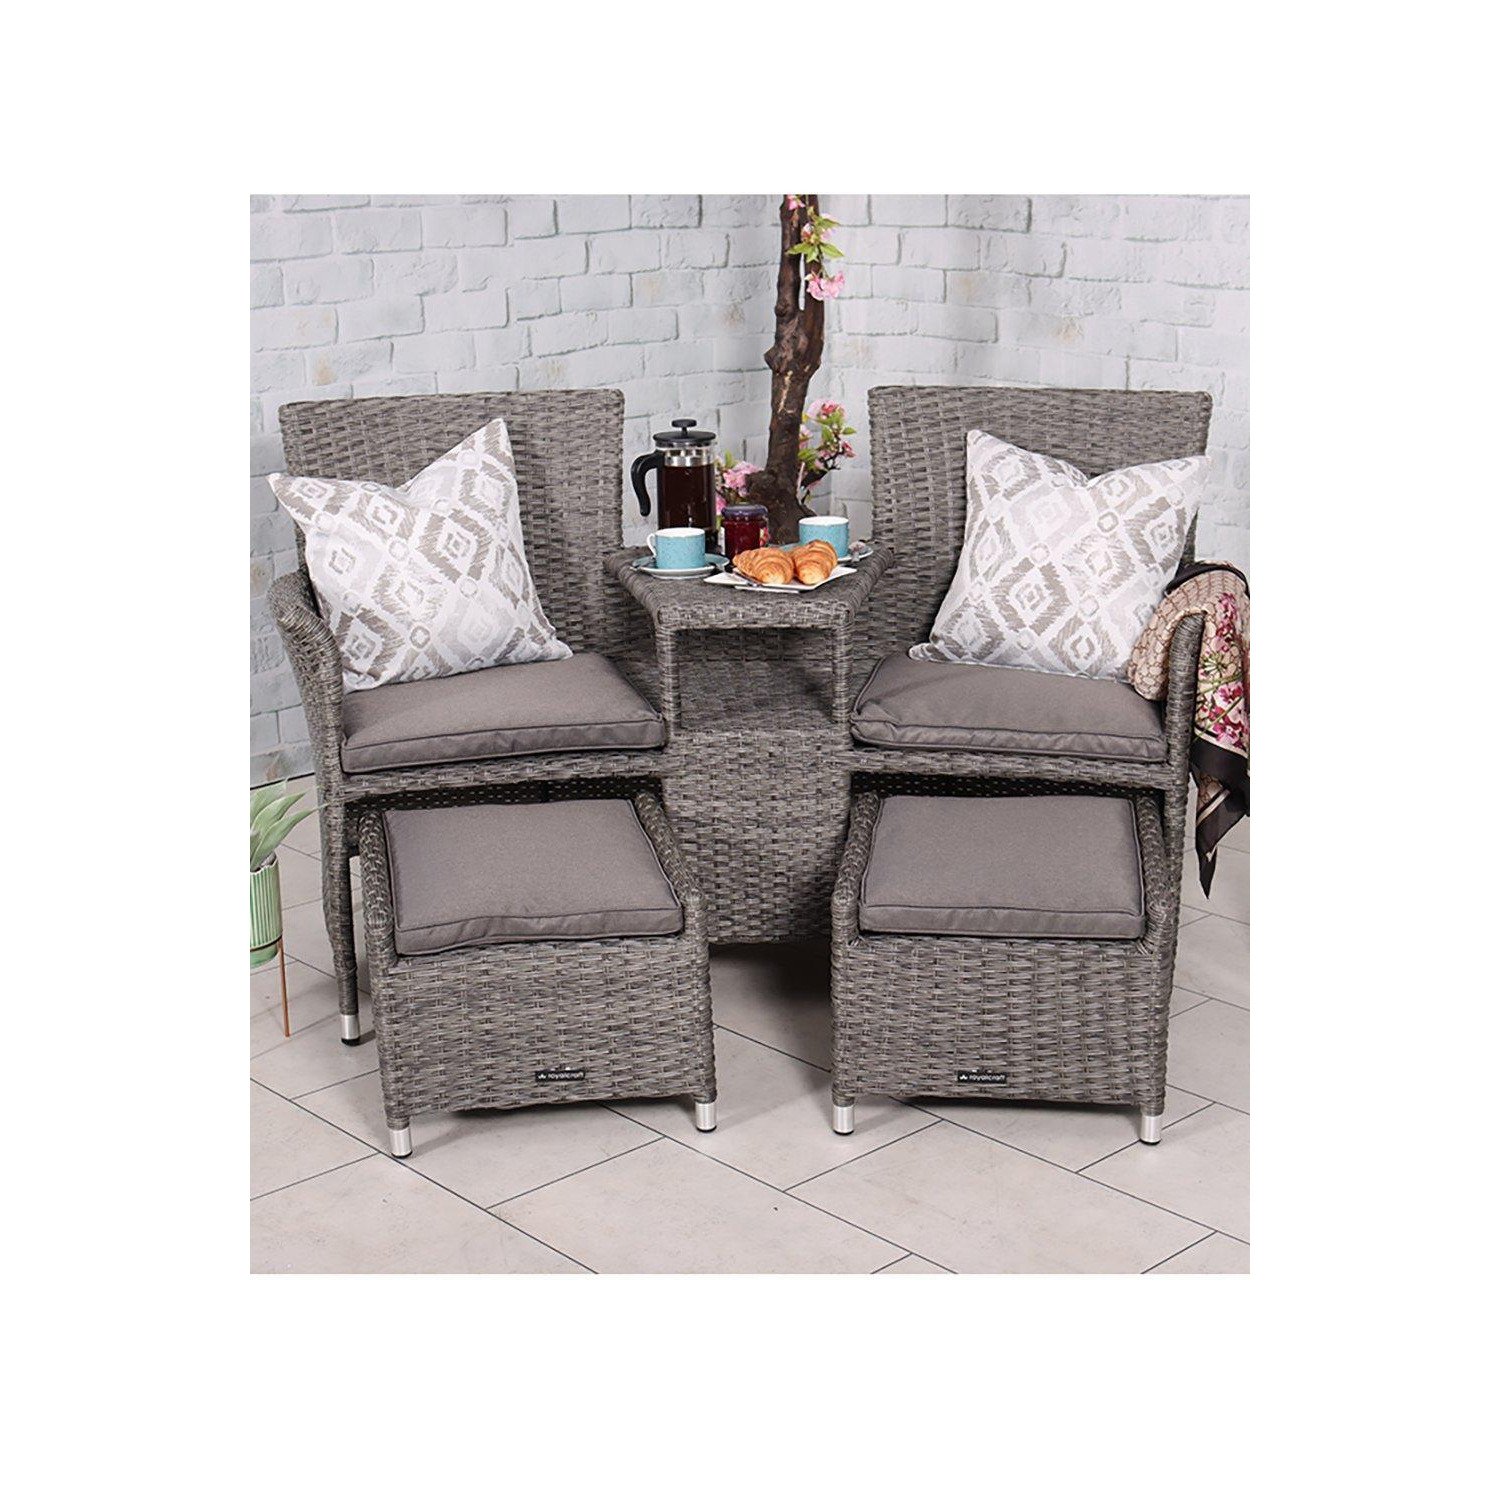 Paris Fixed Companion Set with pull-out footstools incl. Weather Shield Cushions - image 1